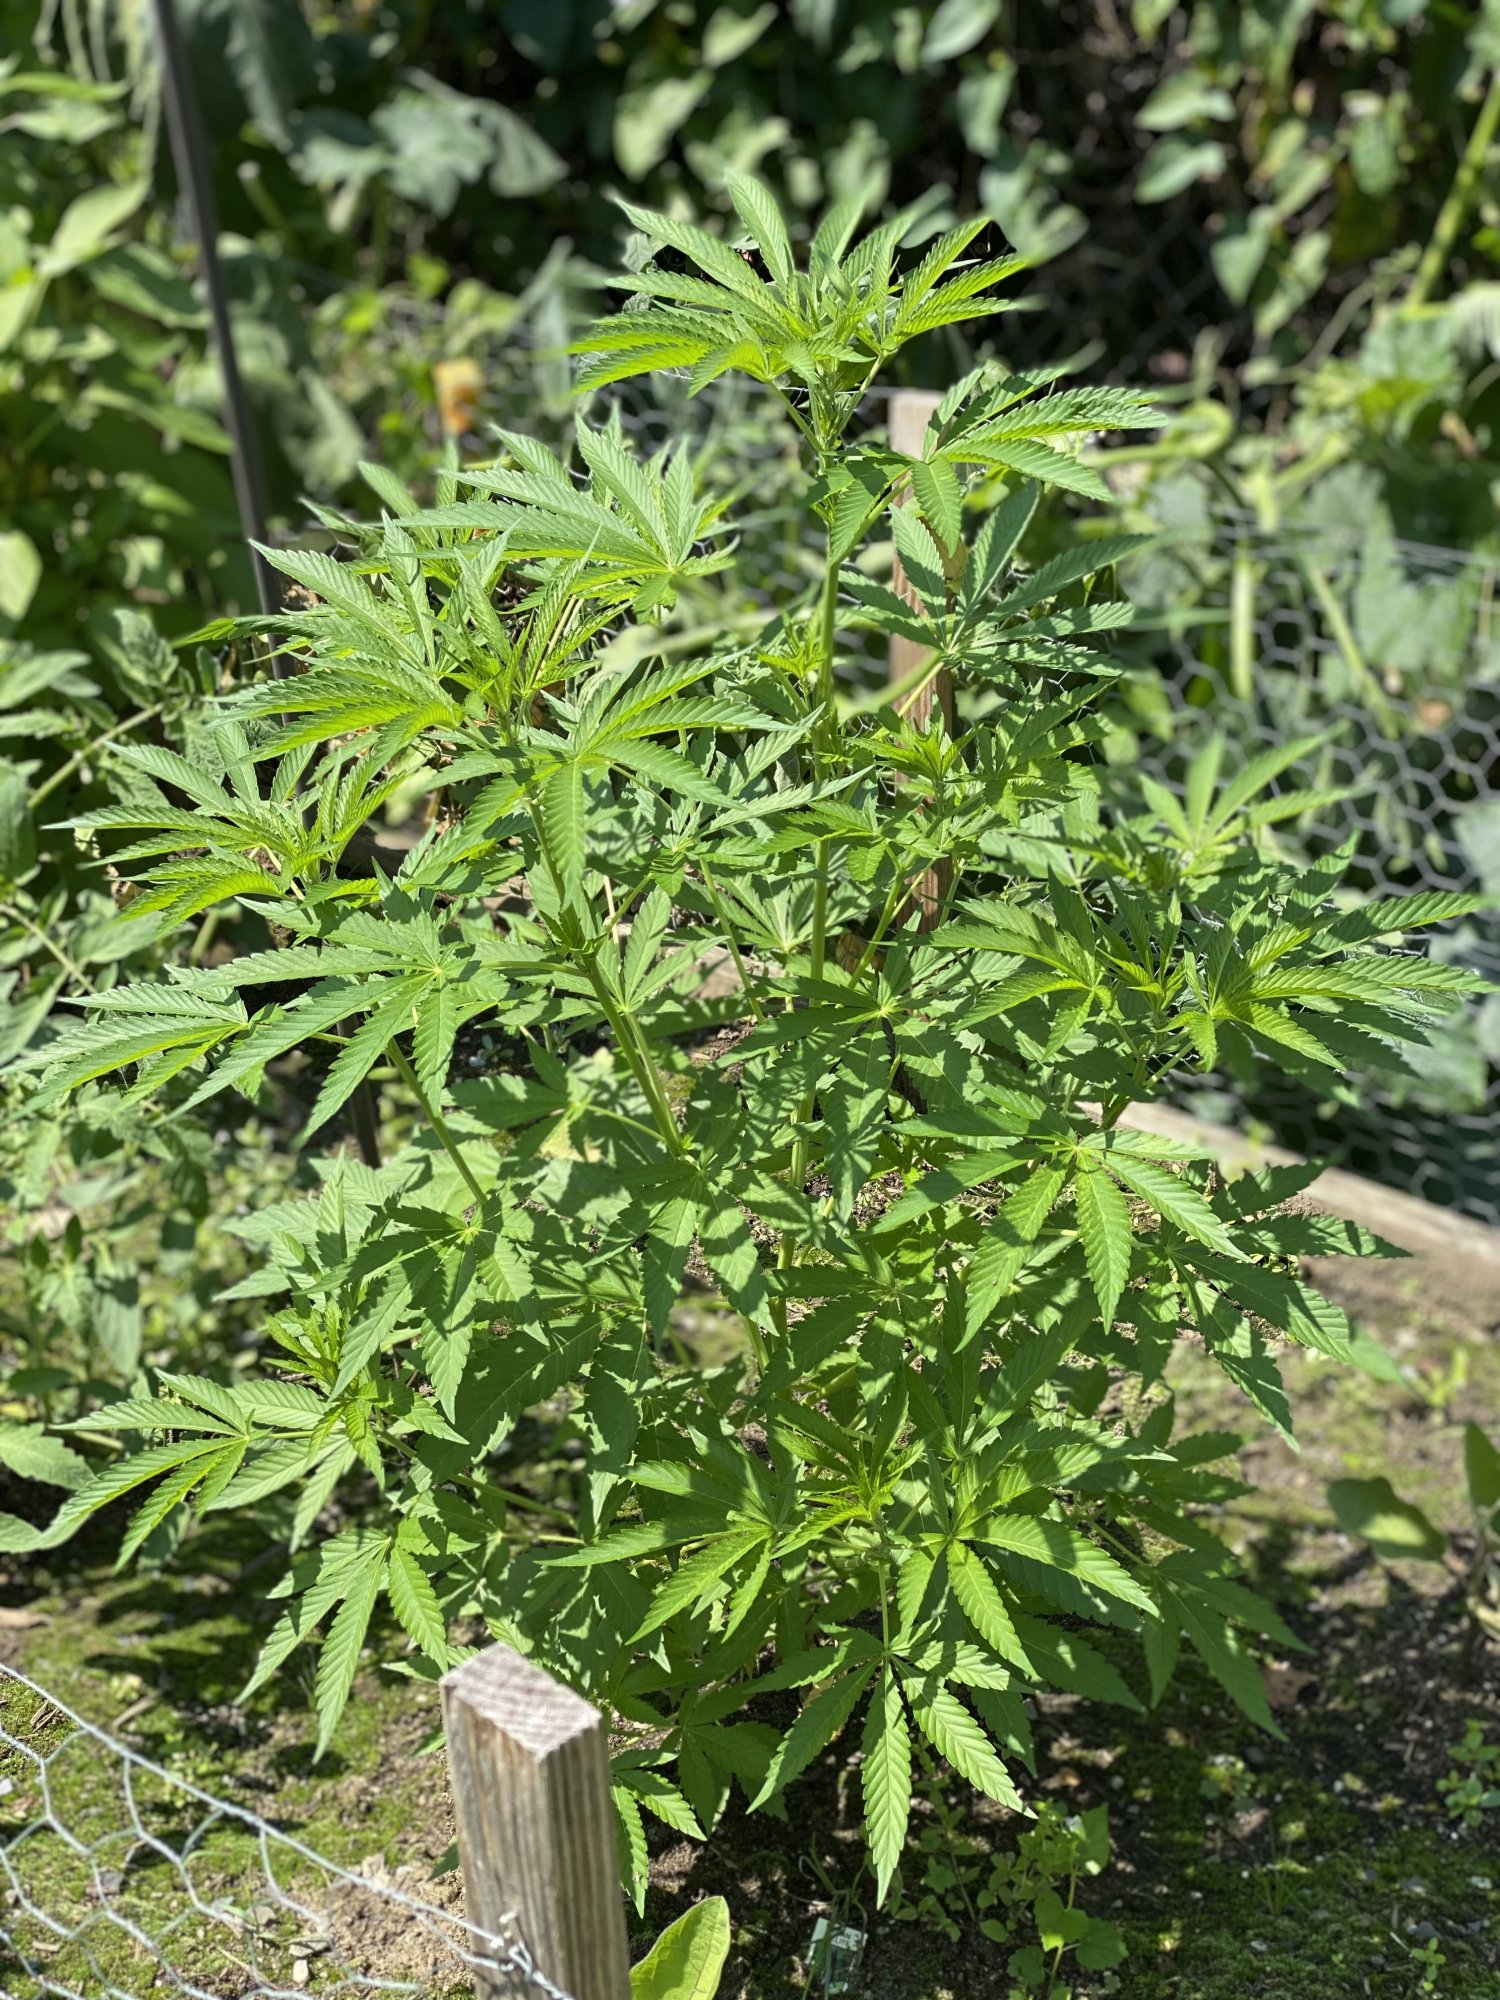 First time outdoor grower anything i should know